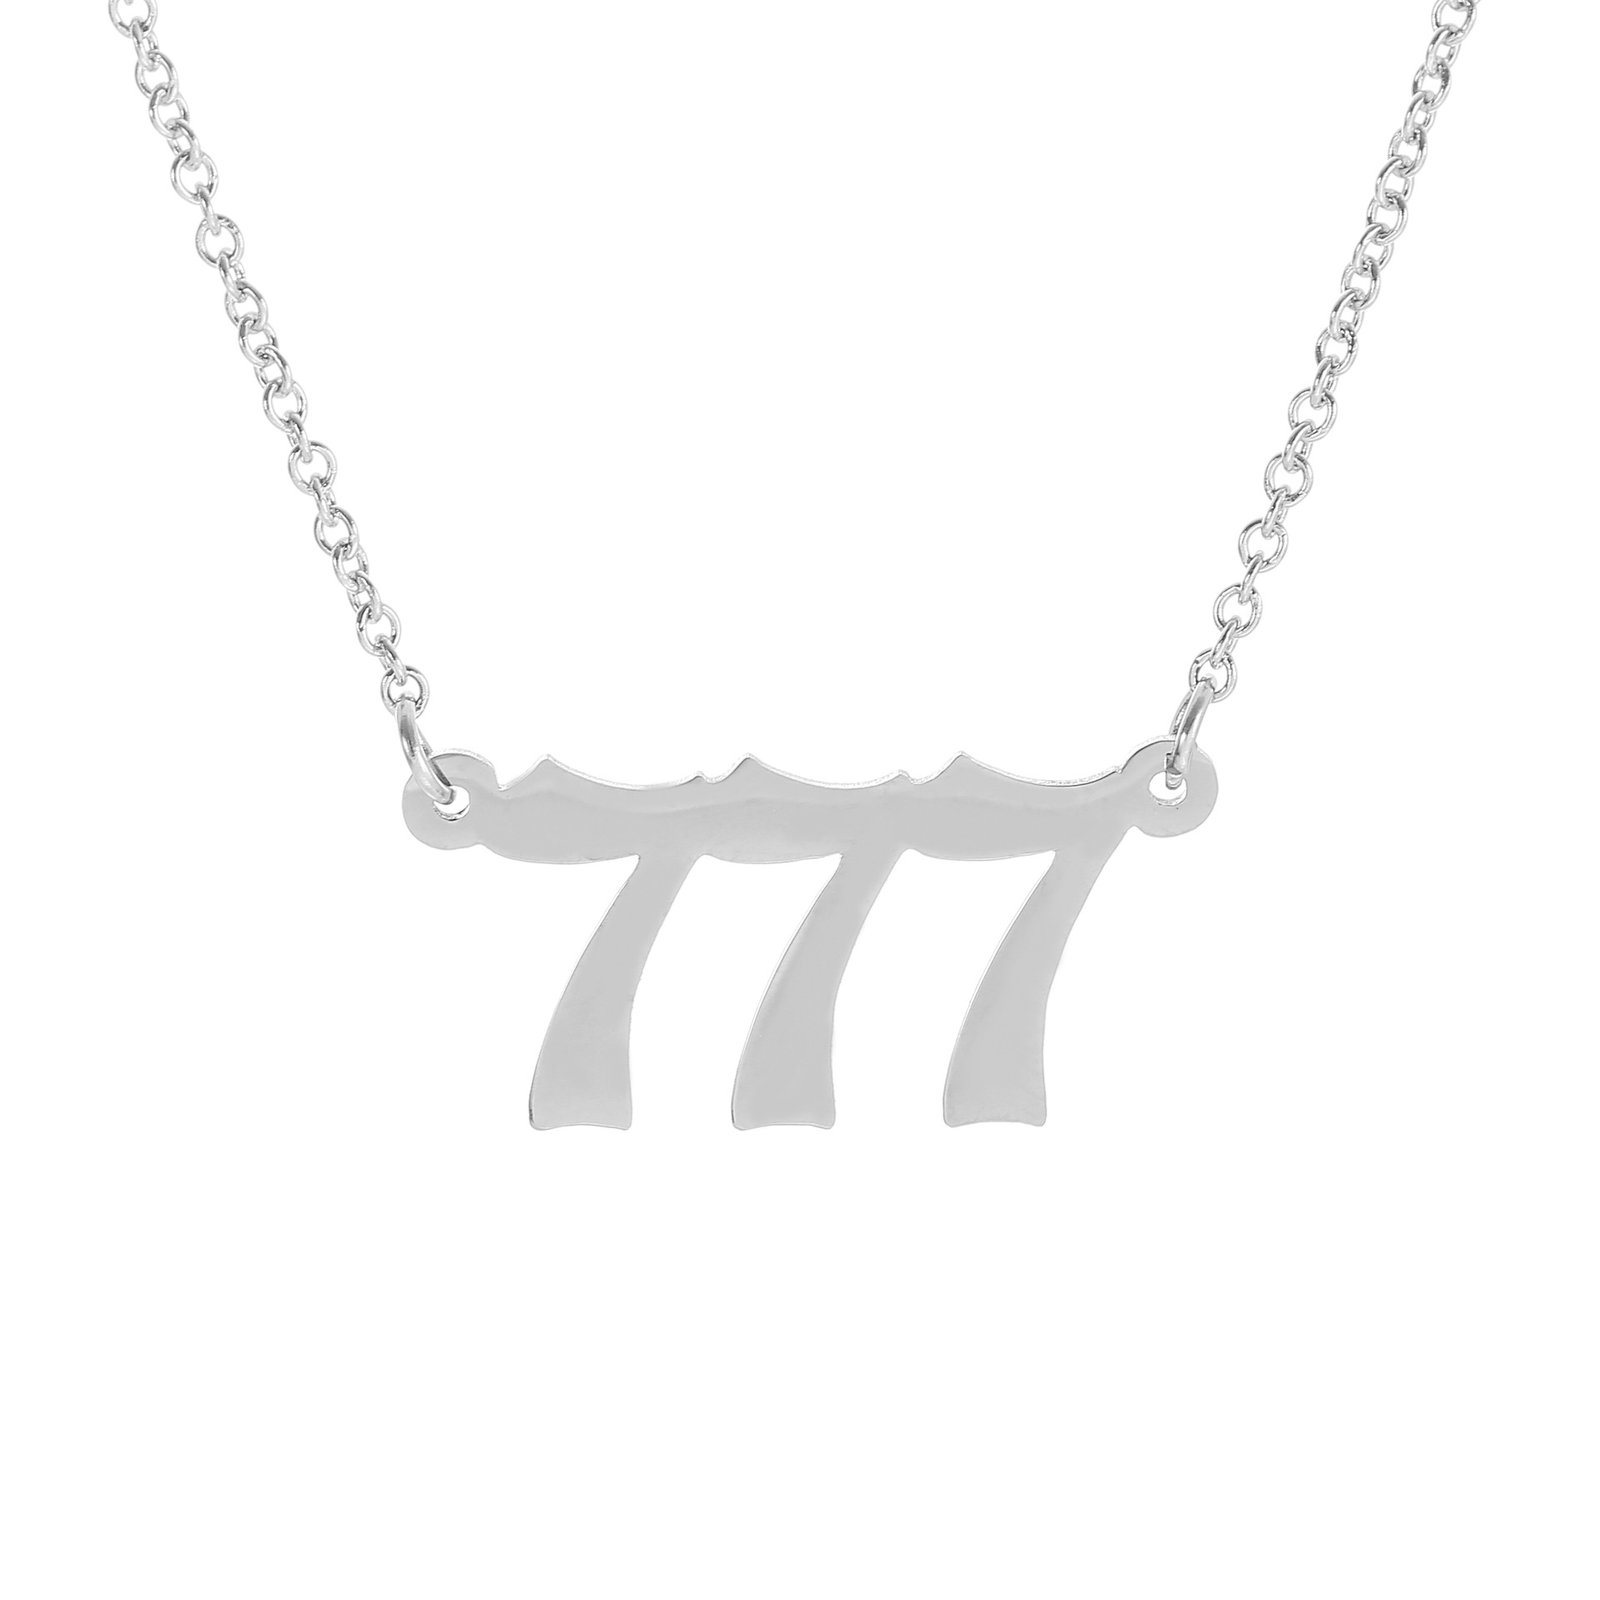 Silver number necklace 9